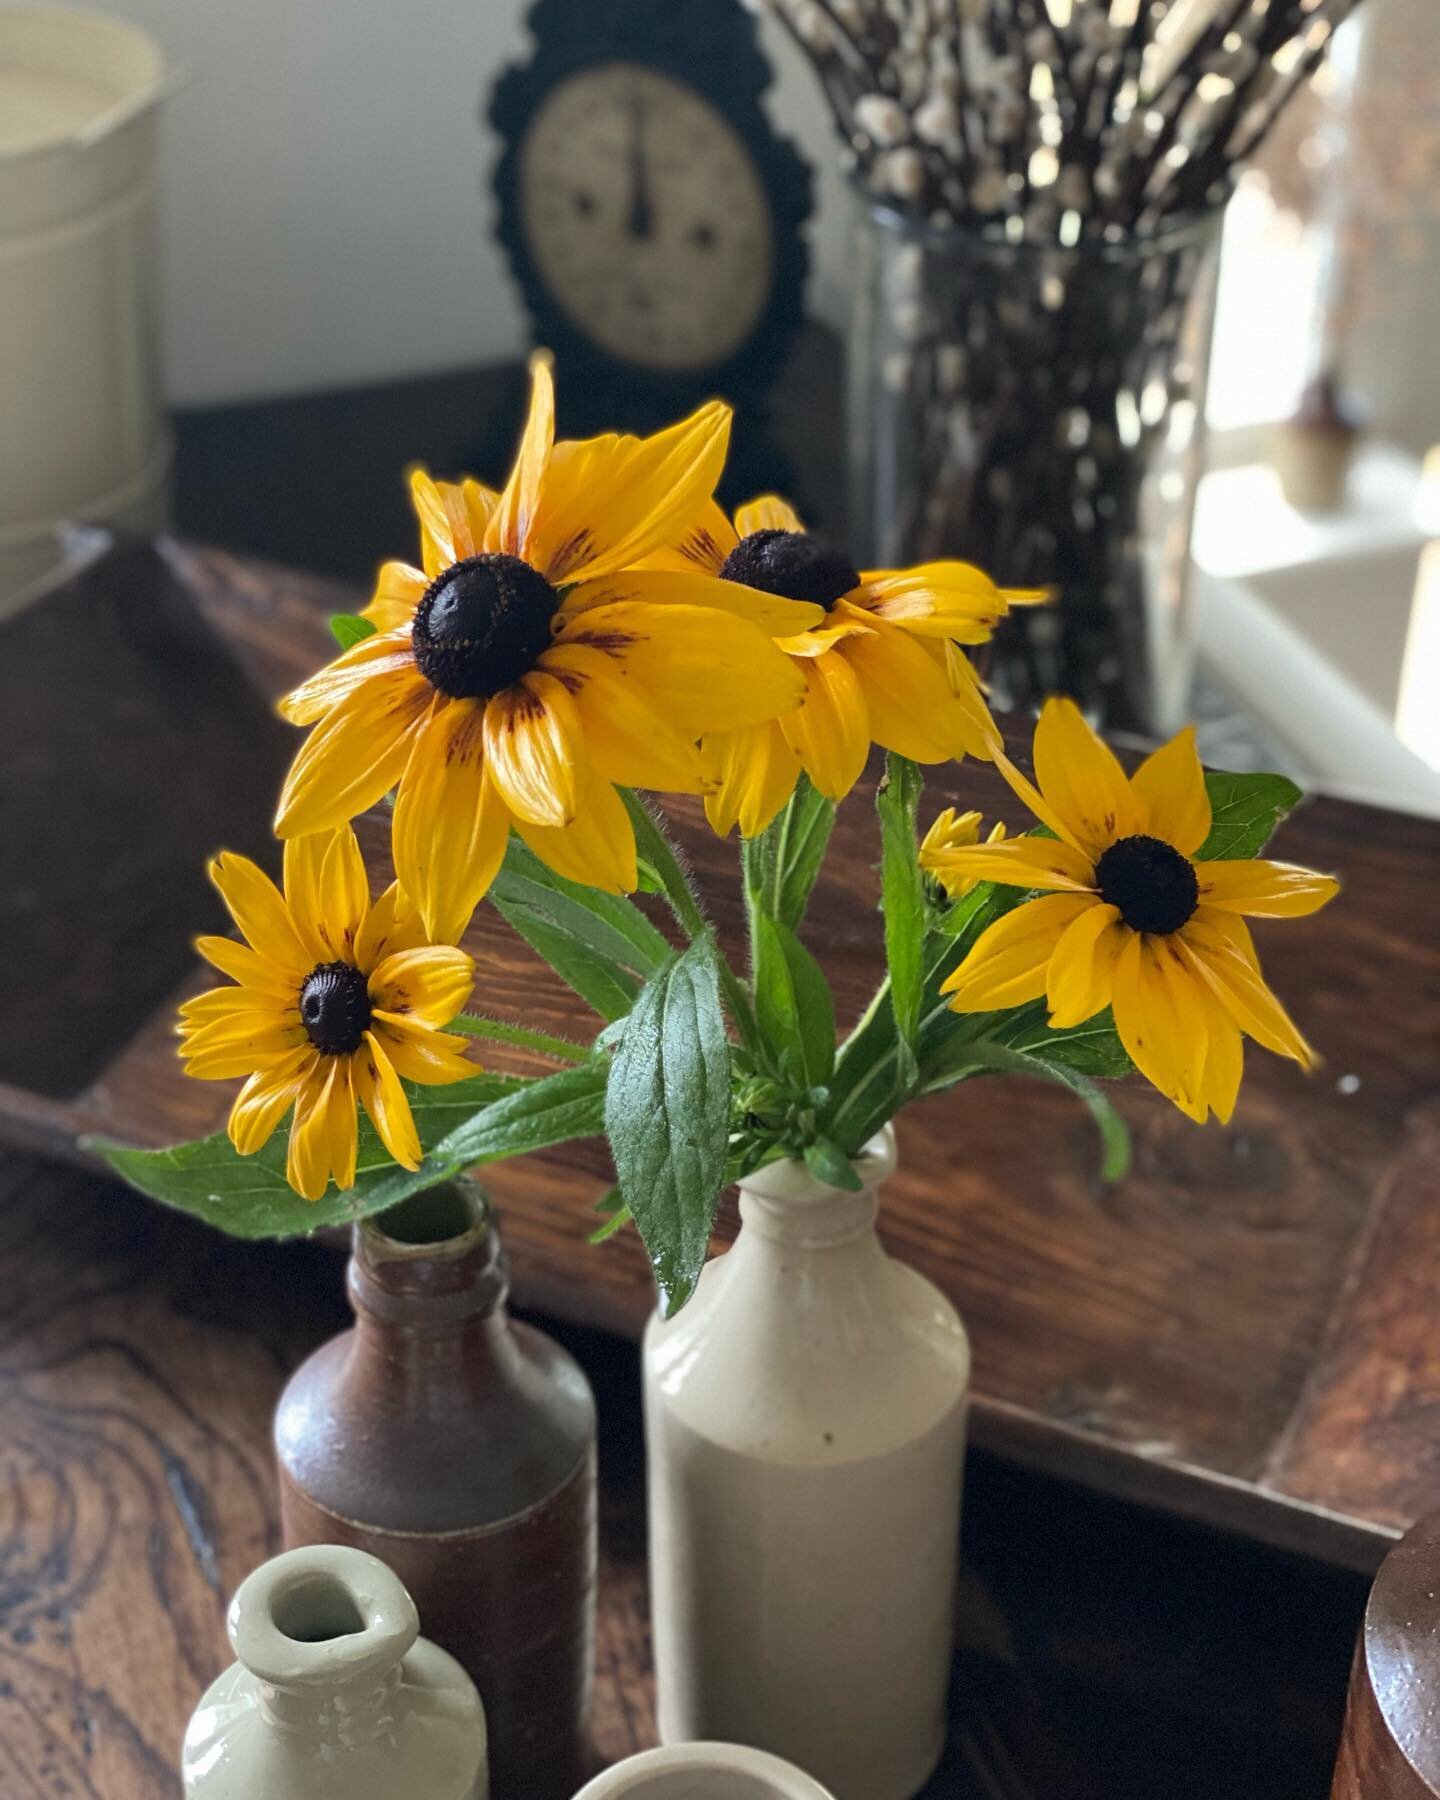 Beautiful Sunbeckia, just picked from the garden to brighten the room on this rainy September morning. 

~